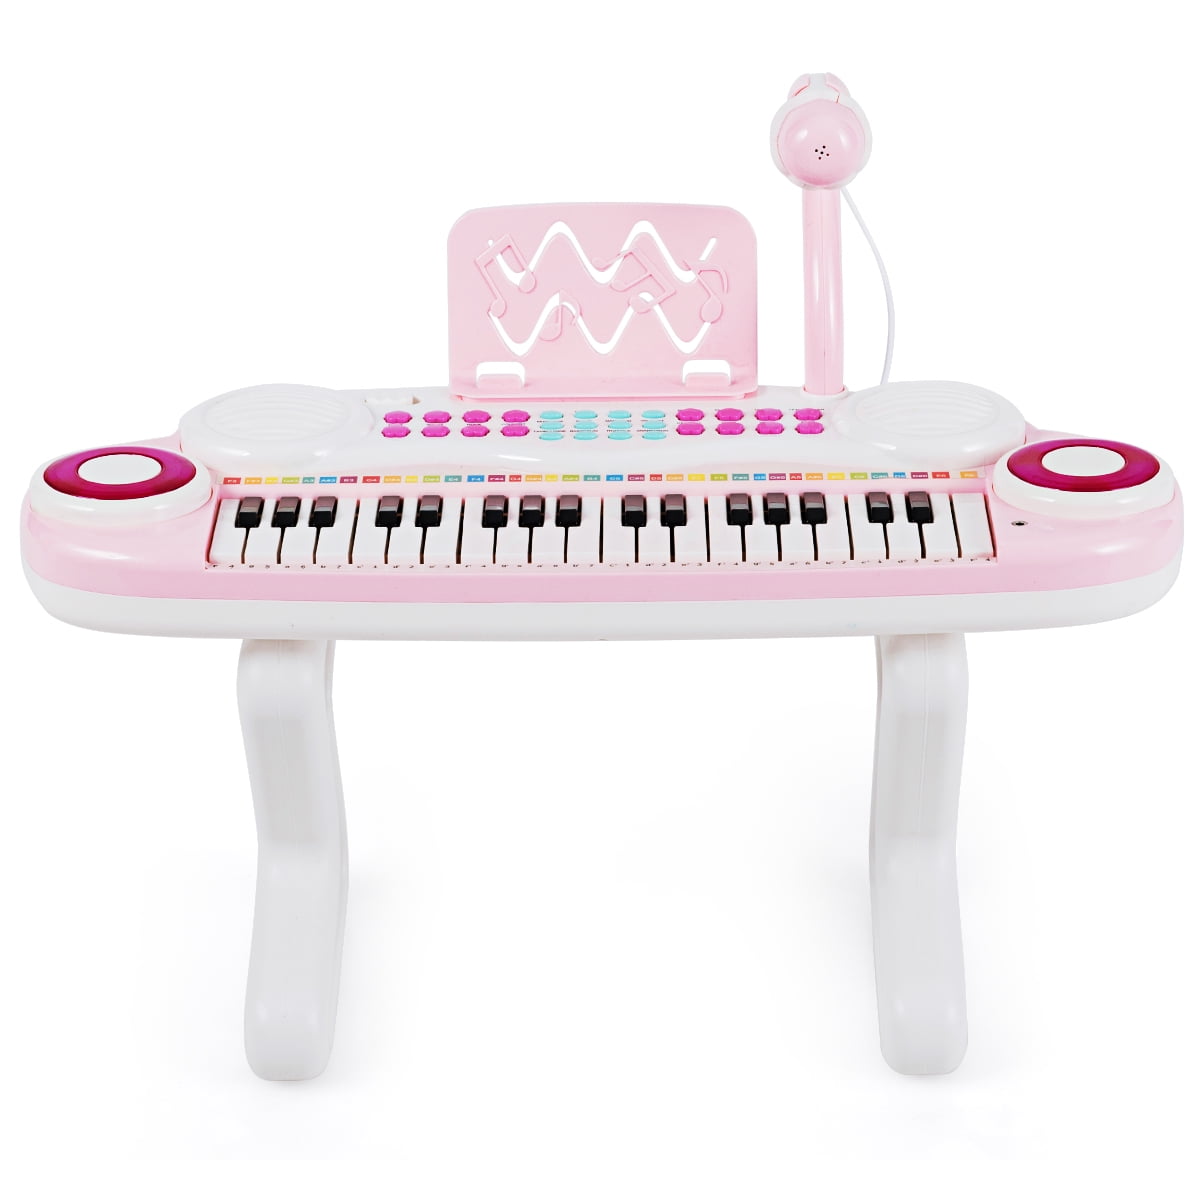 Kids Electronic Piano Keyboard Educational Music Toy With Microphone 37 Keys 